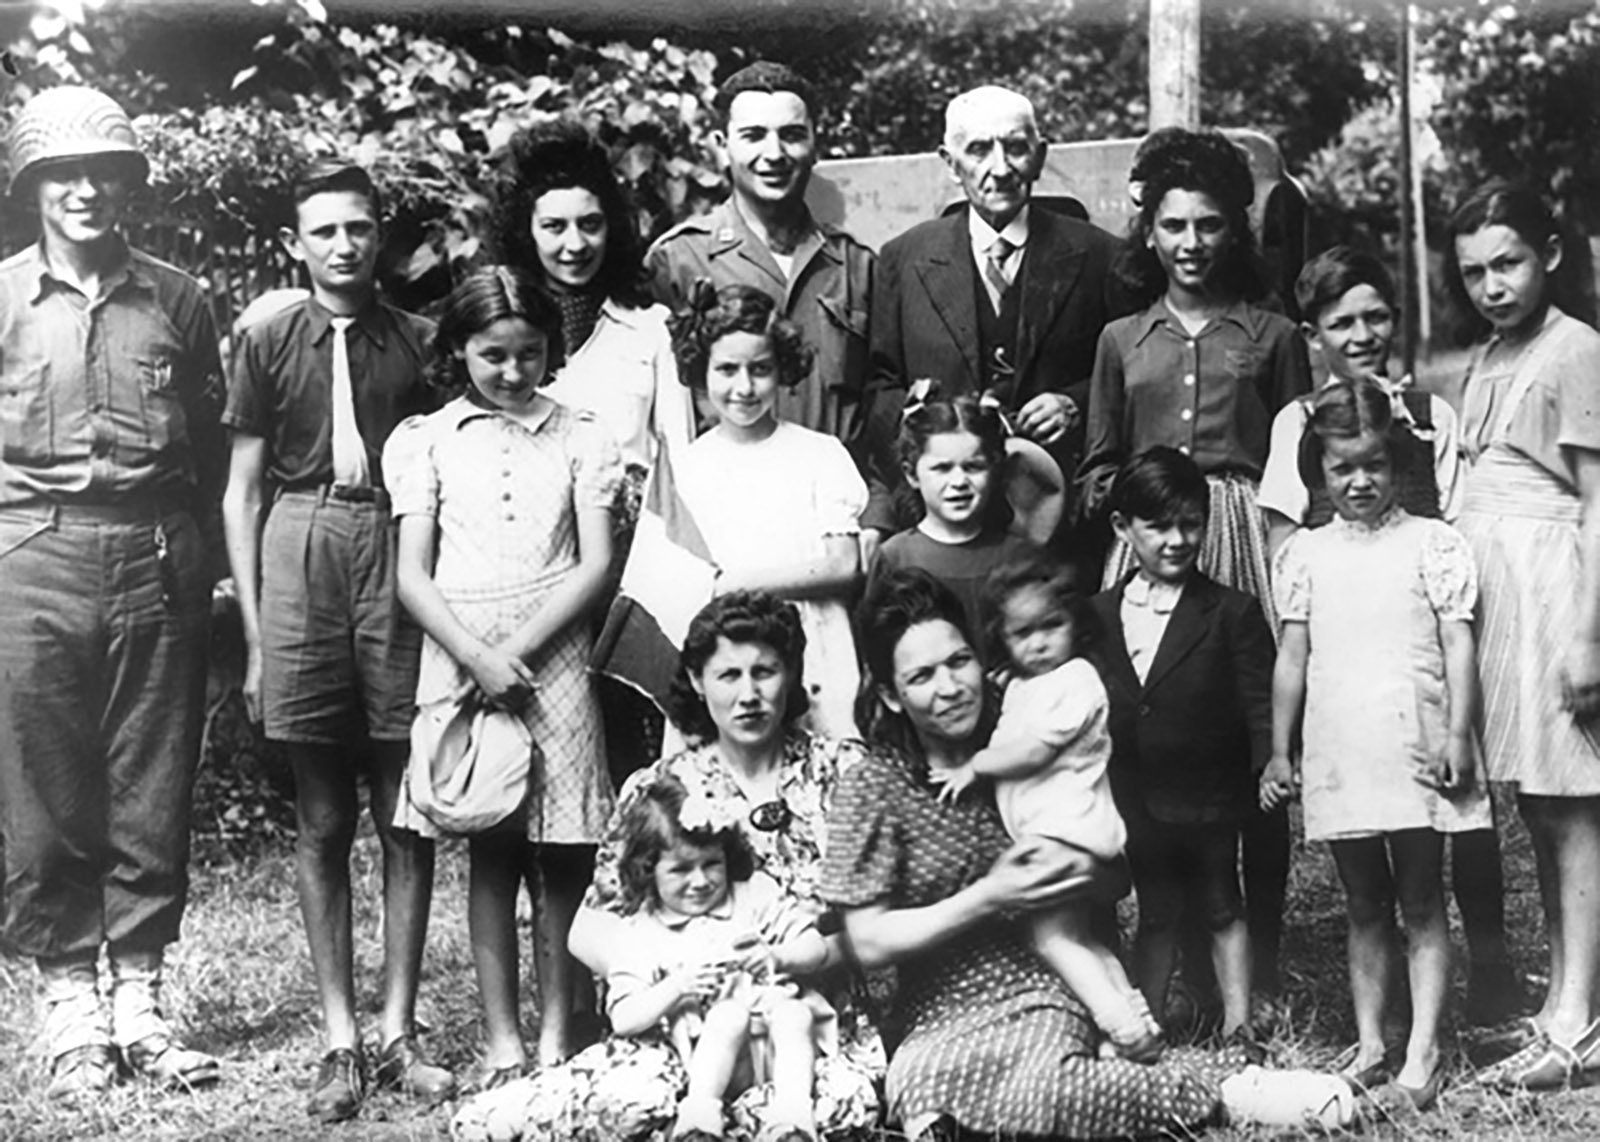 The elderly Aristide Gasnier, mayor of Vibraye, with two US soldiers and some of the Jewish refugees he helped save during the Nazi occupation; Huguette stands directly in front of Gasnier; her older brother Maurice is the boy at the far right. Sarthe, France, 1944